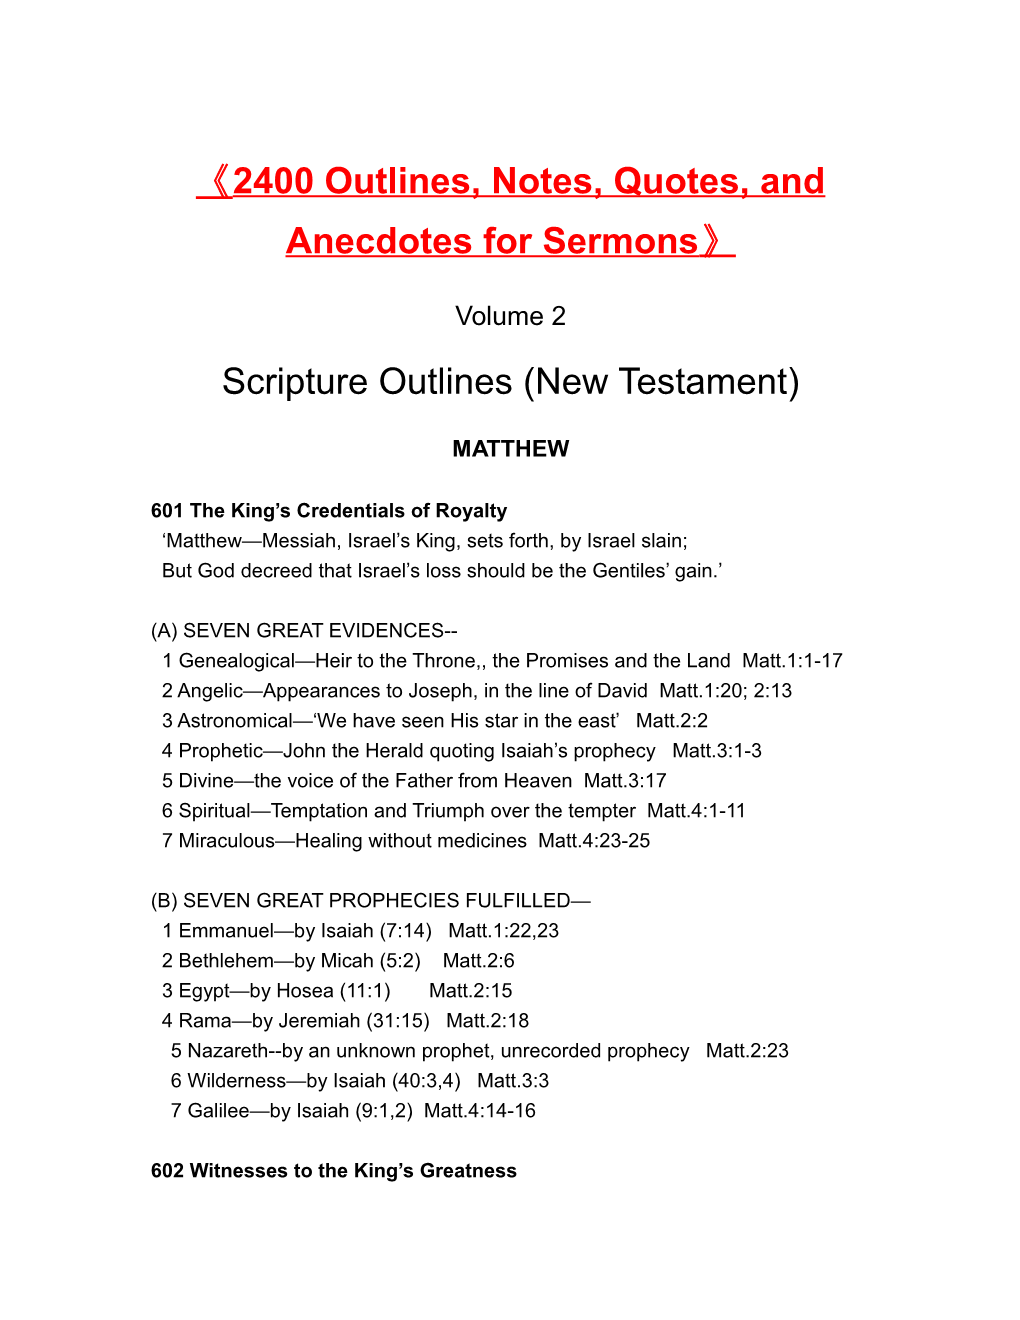 2400 Outlines, Notes, Quotes, and Anecdotes for Sermons